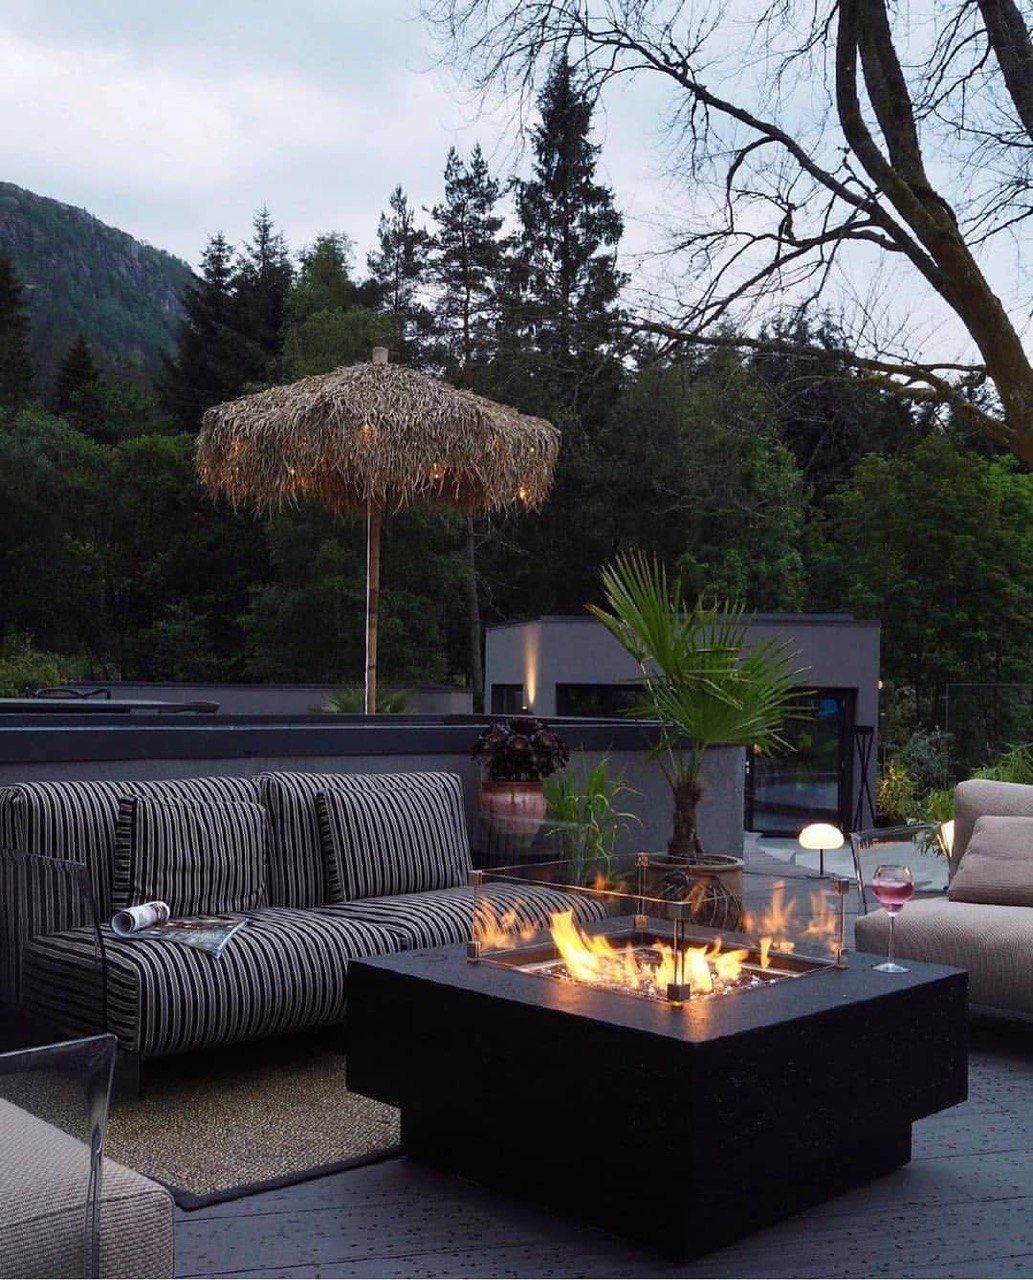 a fire pit with a fire pit and a fire pit with trees and mountains in the background